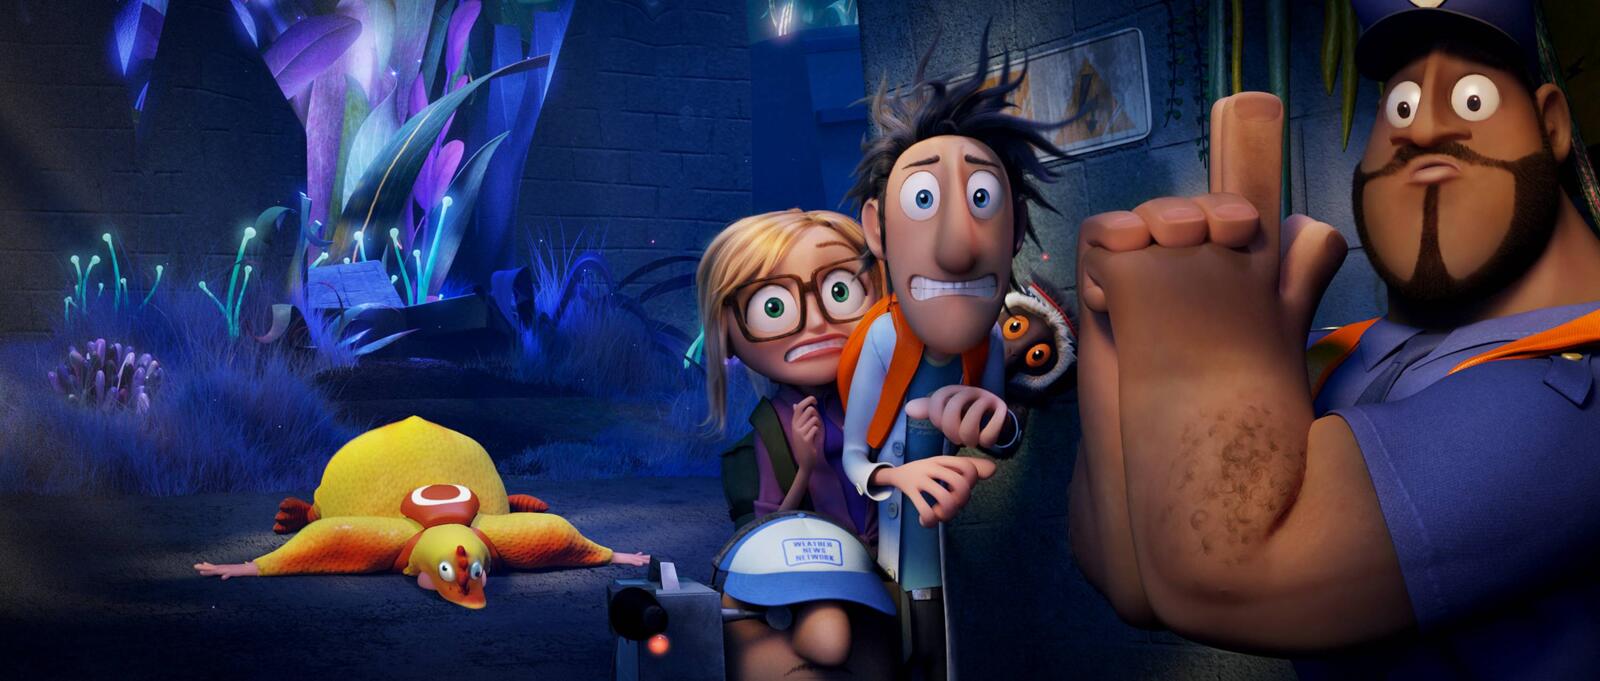 Wallpapers Cloudy with a Chance of Meatballs 2 fantasy family on the desktop